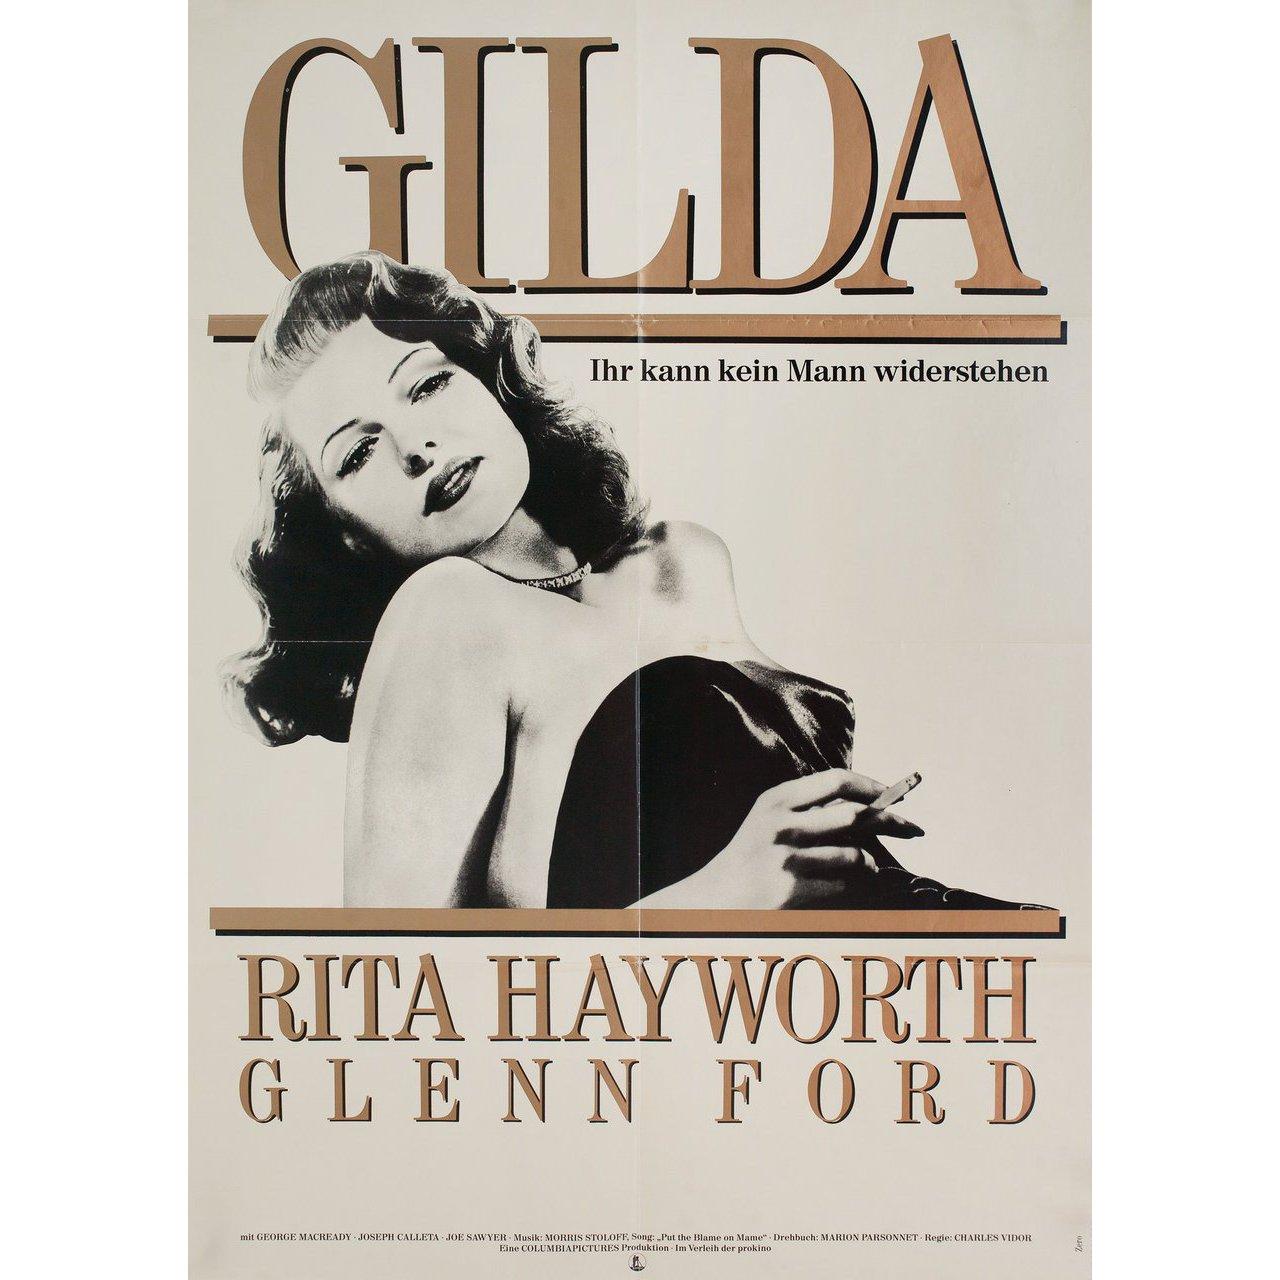 Original 1970s re-release German A1 poster for the 1946 film Gilda directed by Charles Vidor with Rita Hayworth / Glenn Ford / George Macready / Joseph Calleia. Fine condition, folded. Many original posters were issued folded or were subsequently